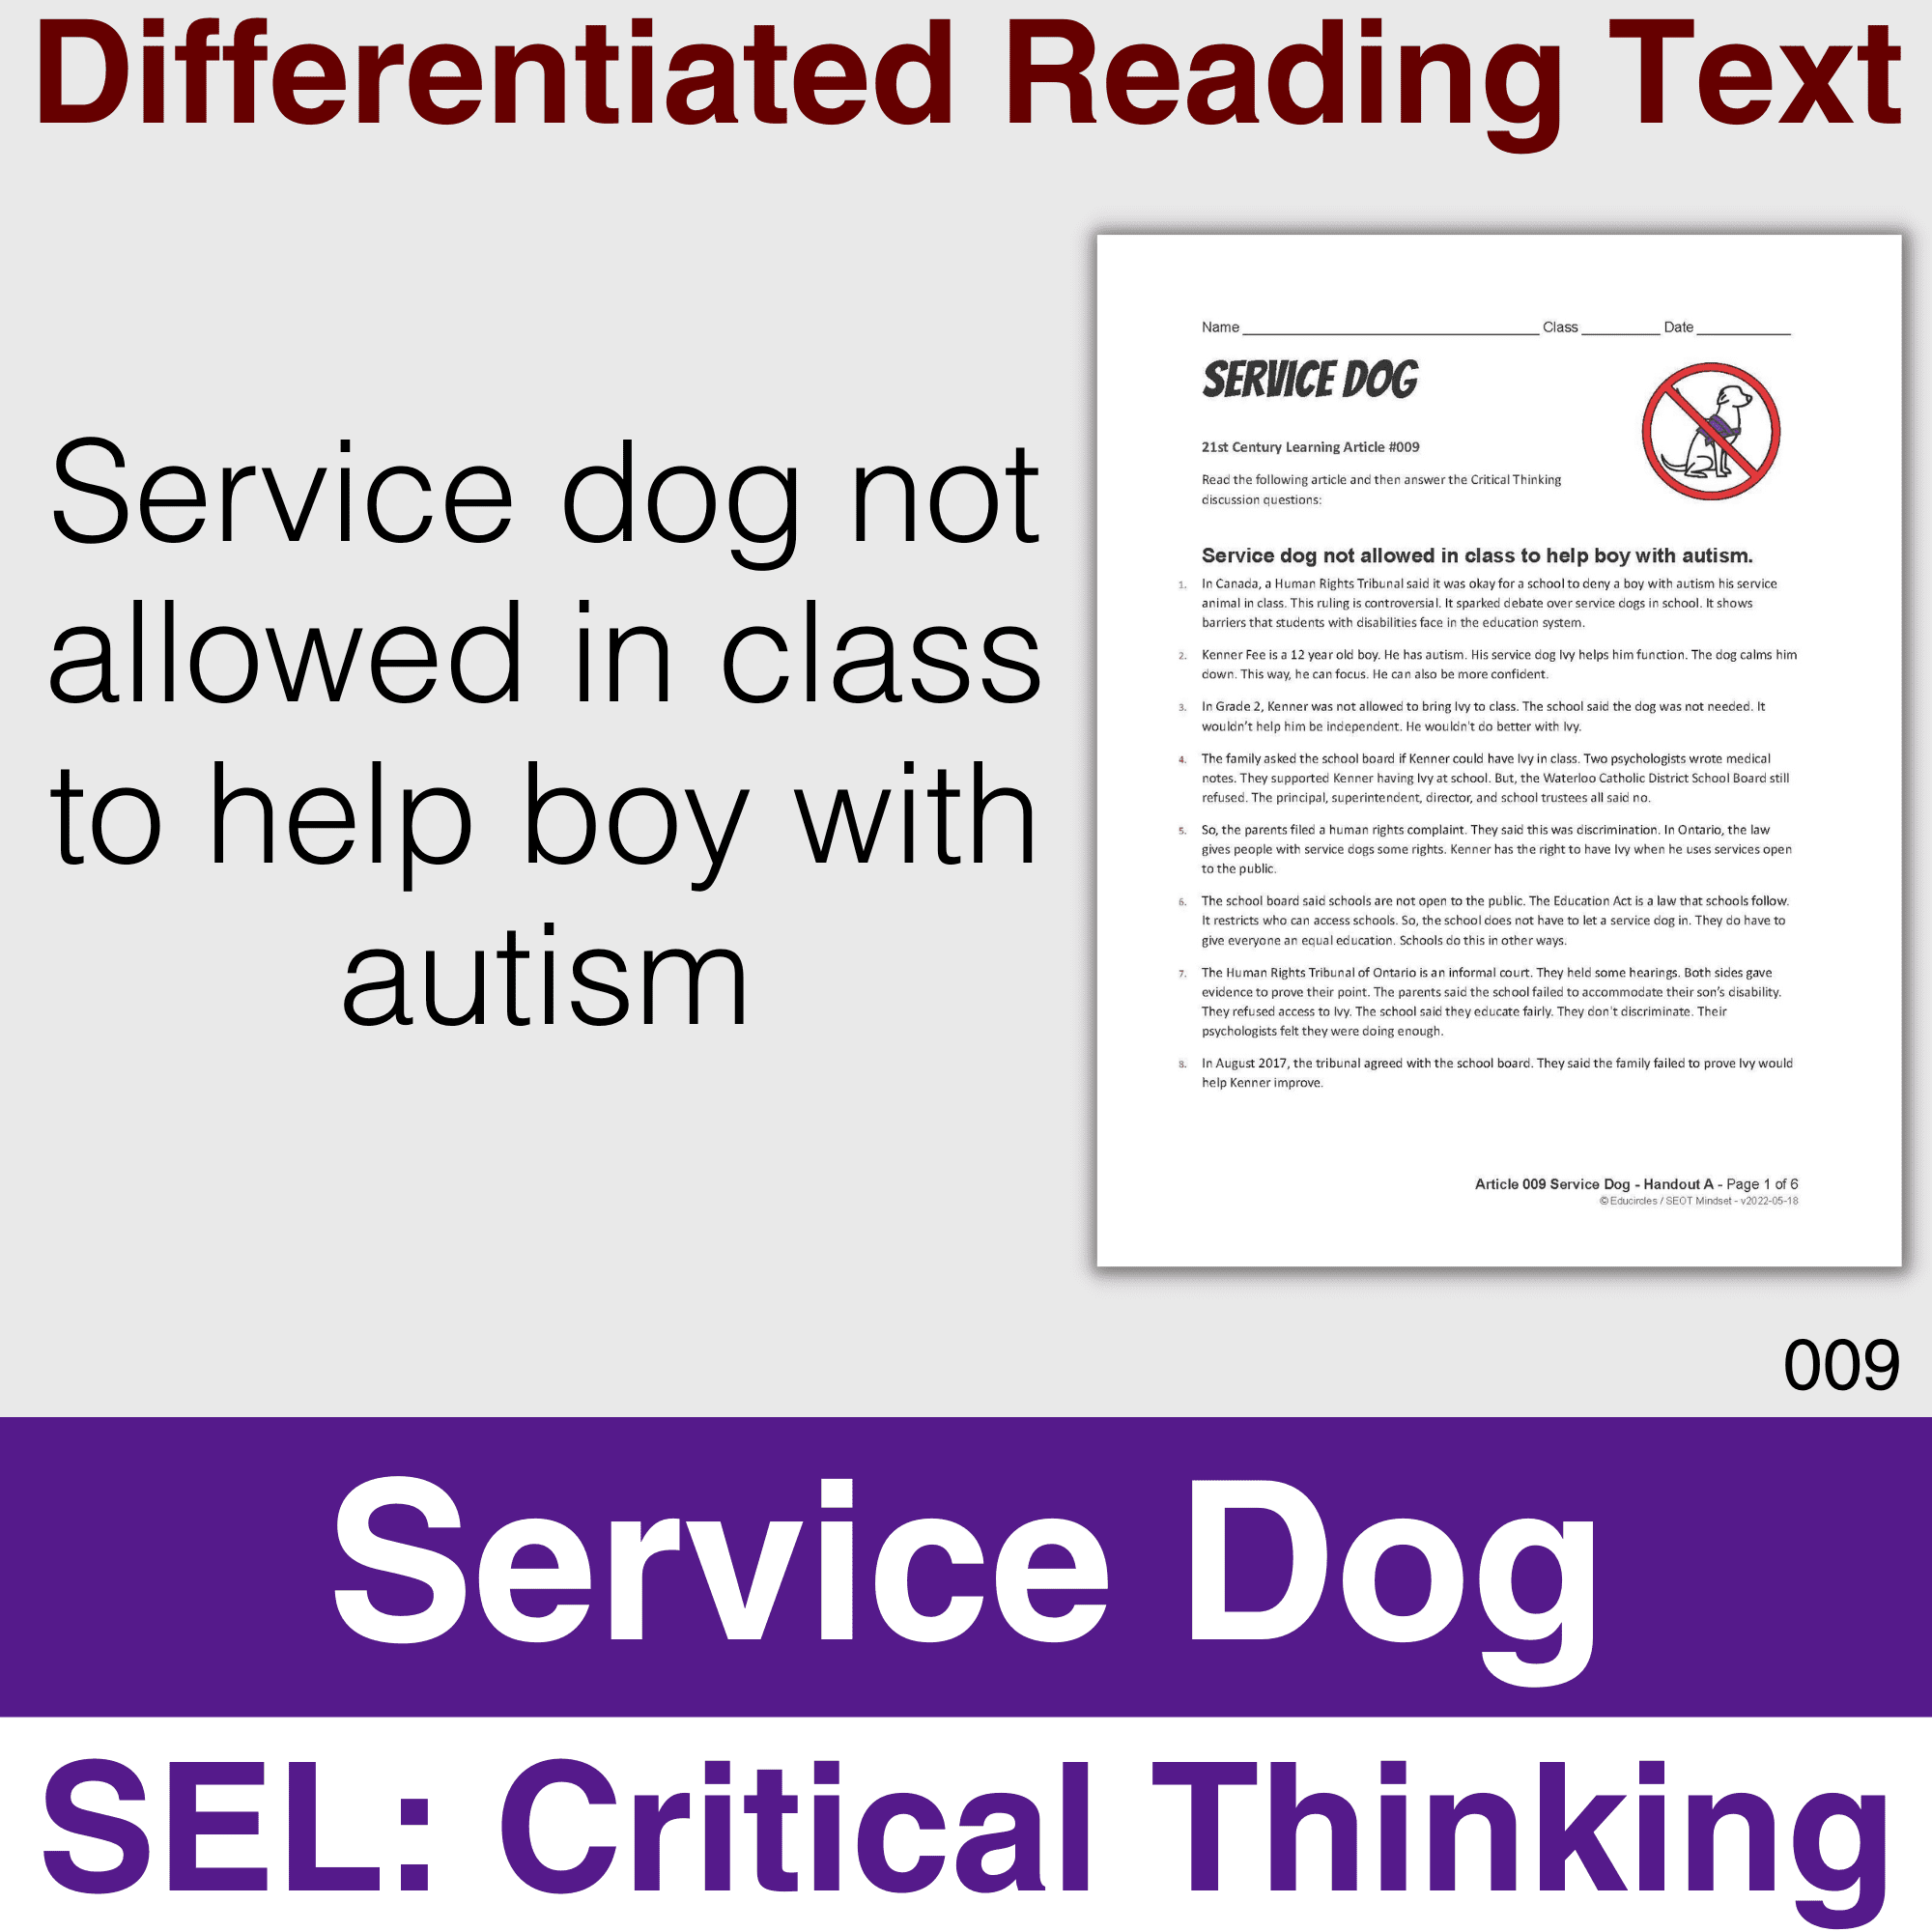 Product Cover: Differentiated Reading Text - Service Dog Not Allowed in Class to Help Boy with Autism; SEL: Critical Thinking